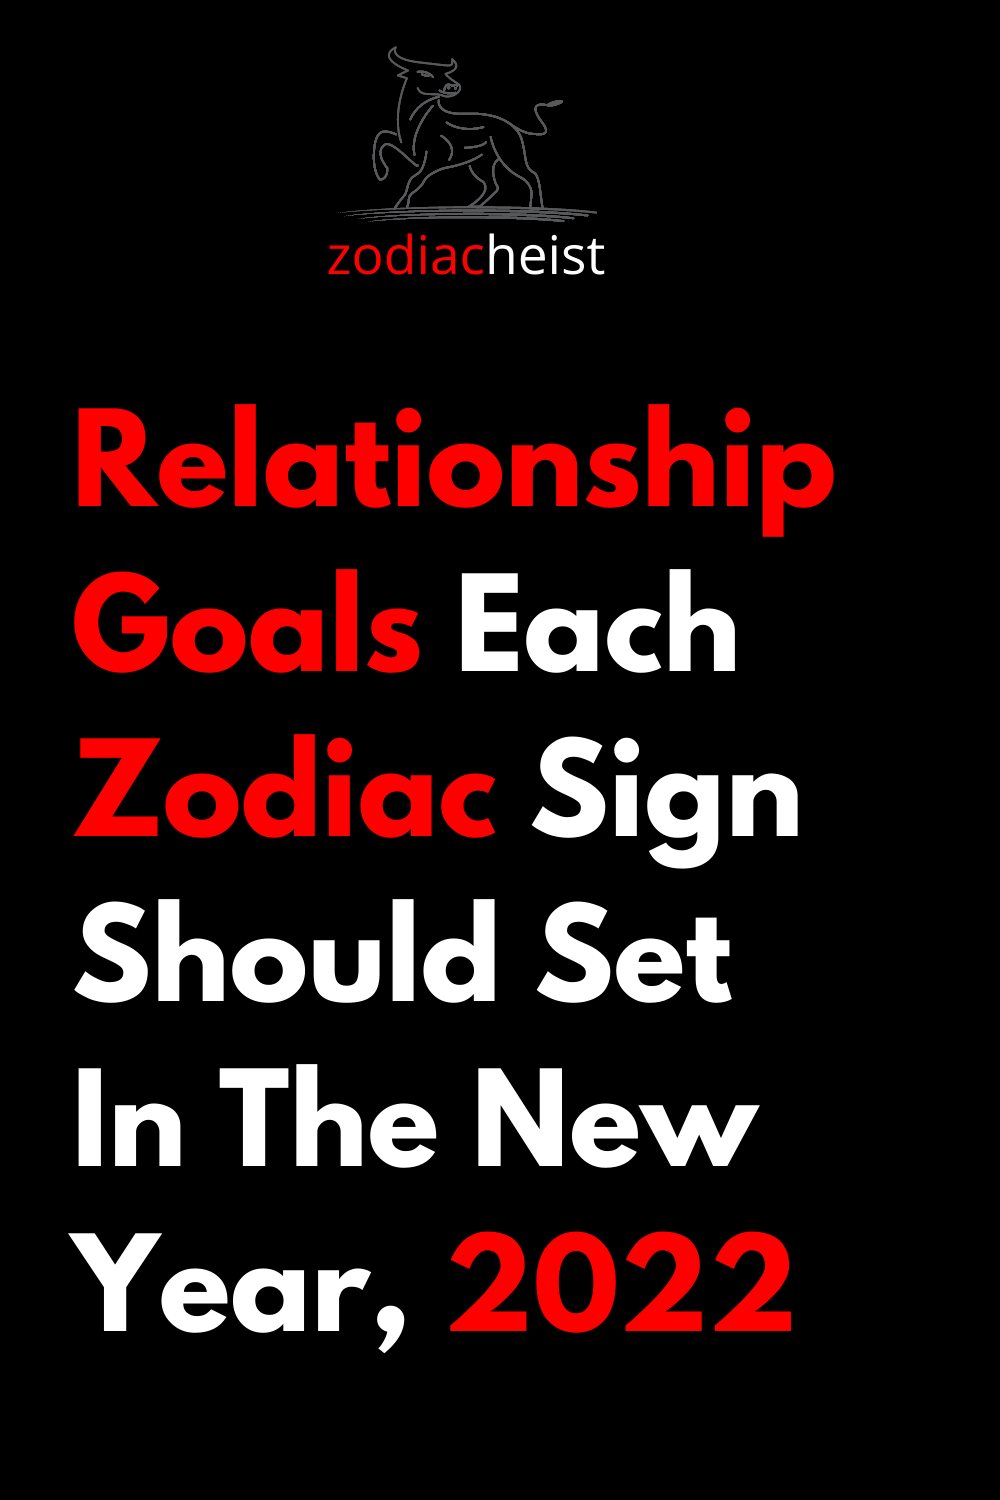 Relationship Goals Each Zodiac Sign Should Set In The New Year, 2022